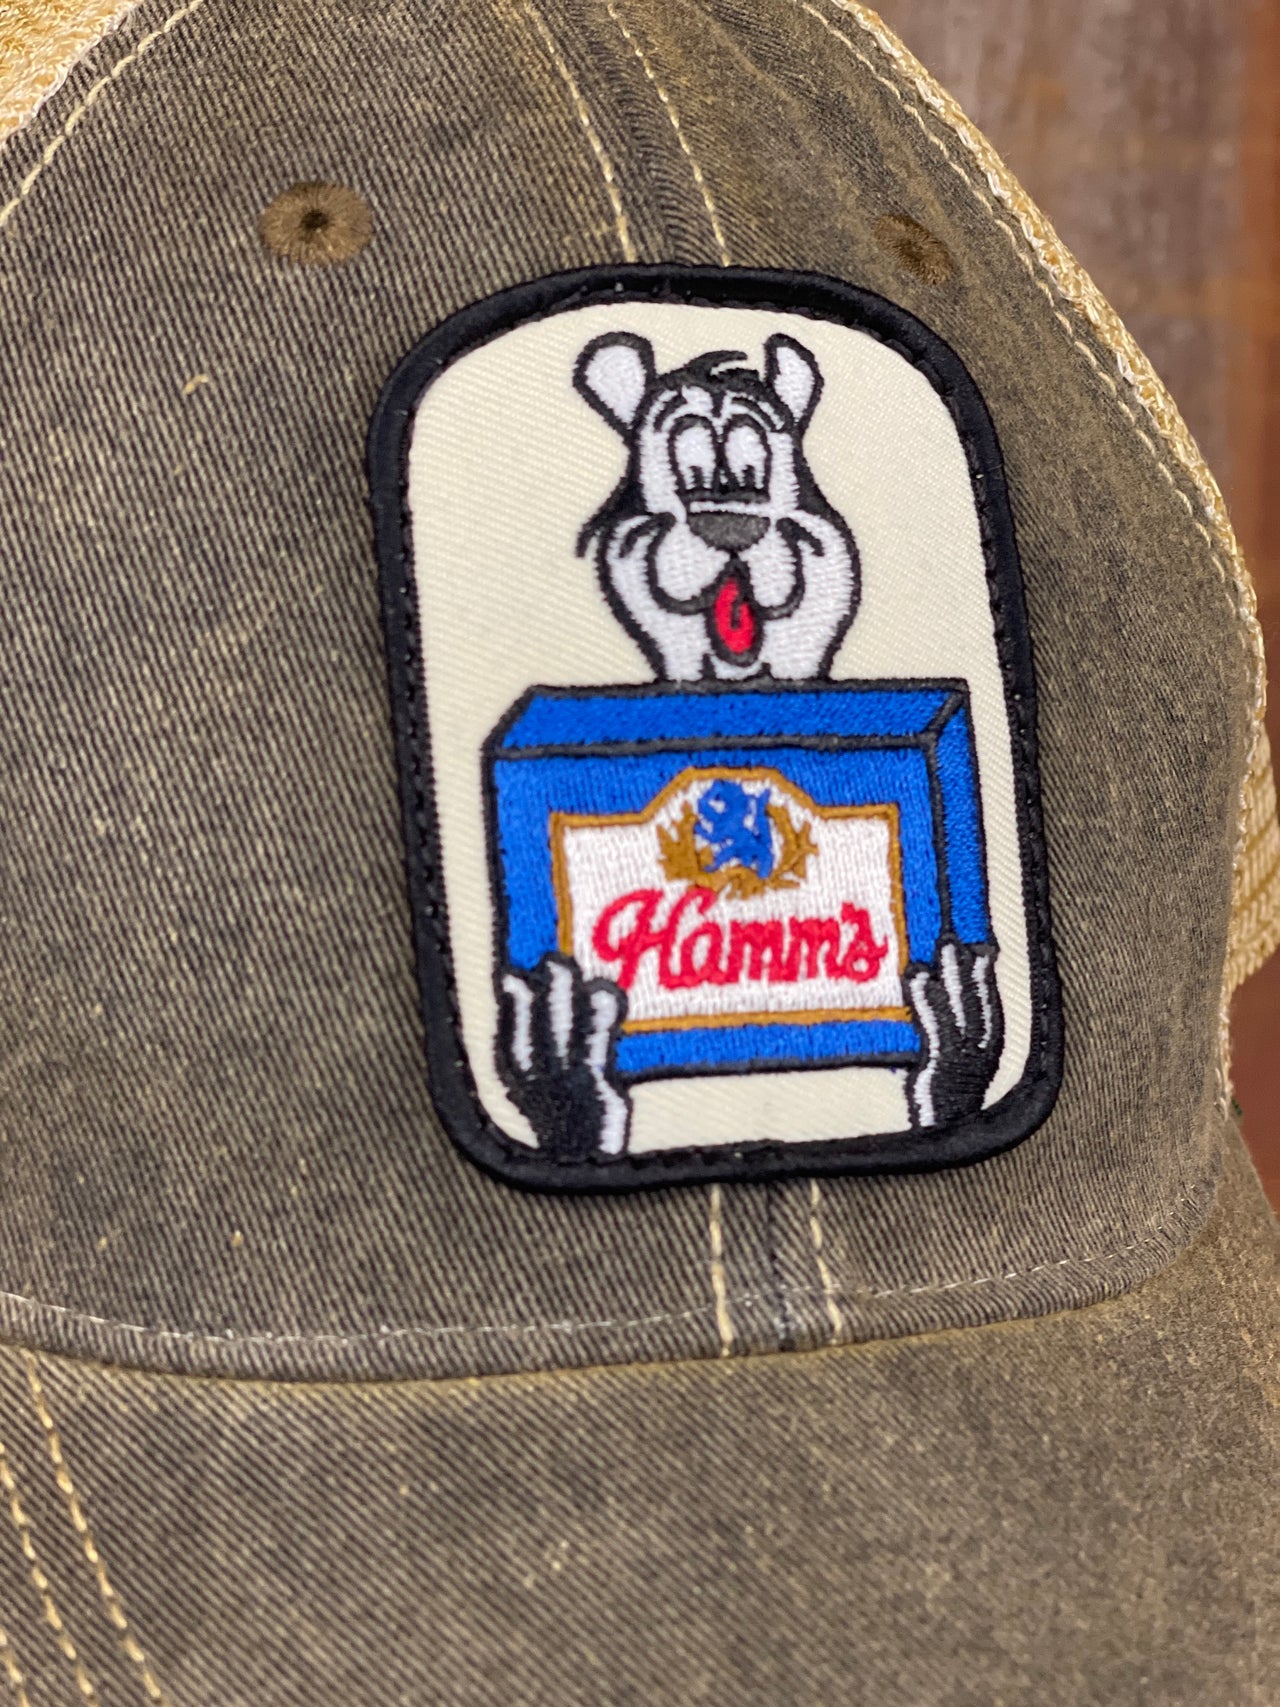 Hamm's 12 Pack Beer Hat- NON- DISTRESSED Black